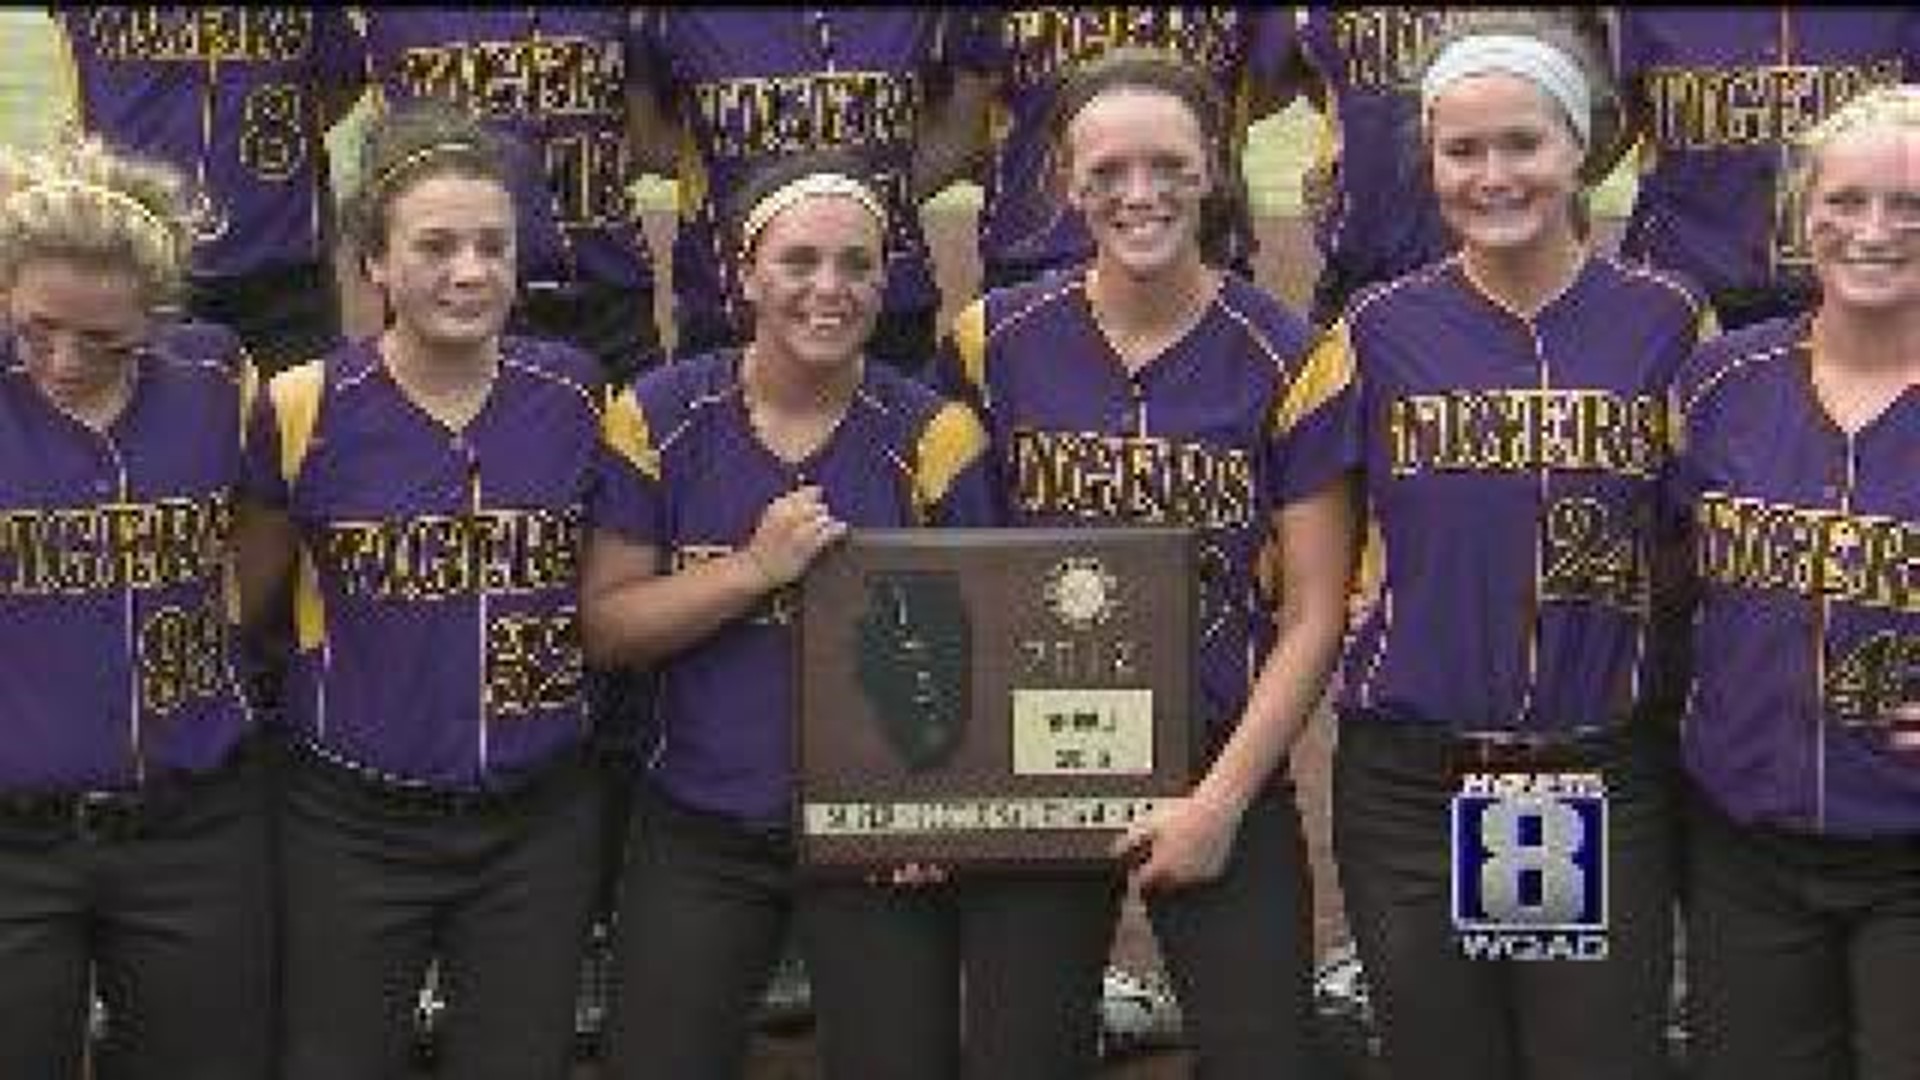 Sherrard Punches 1st Ever Trip to State